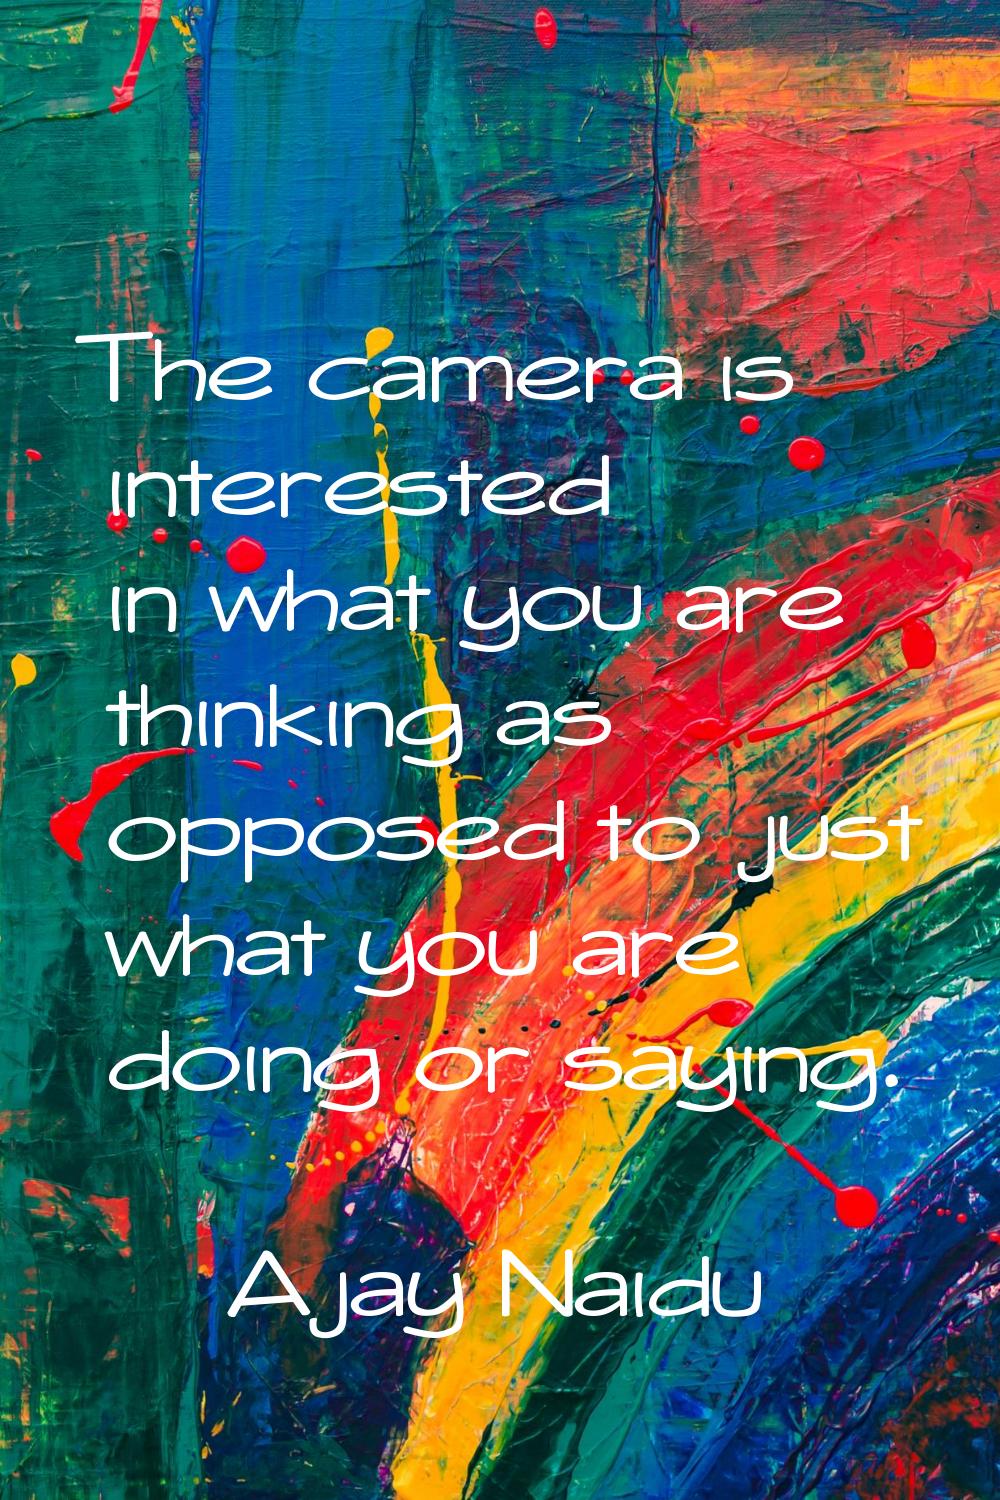 The camera is interested in what you are thinking as opposed to just what you are doing or saying.